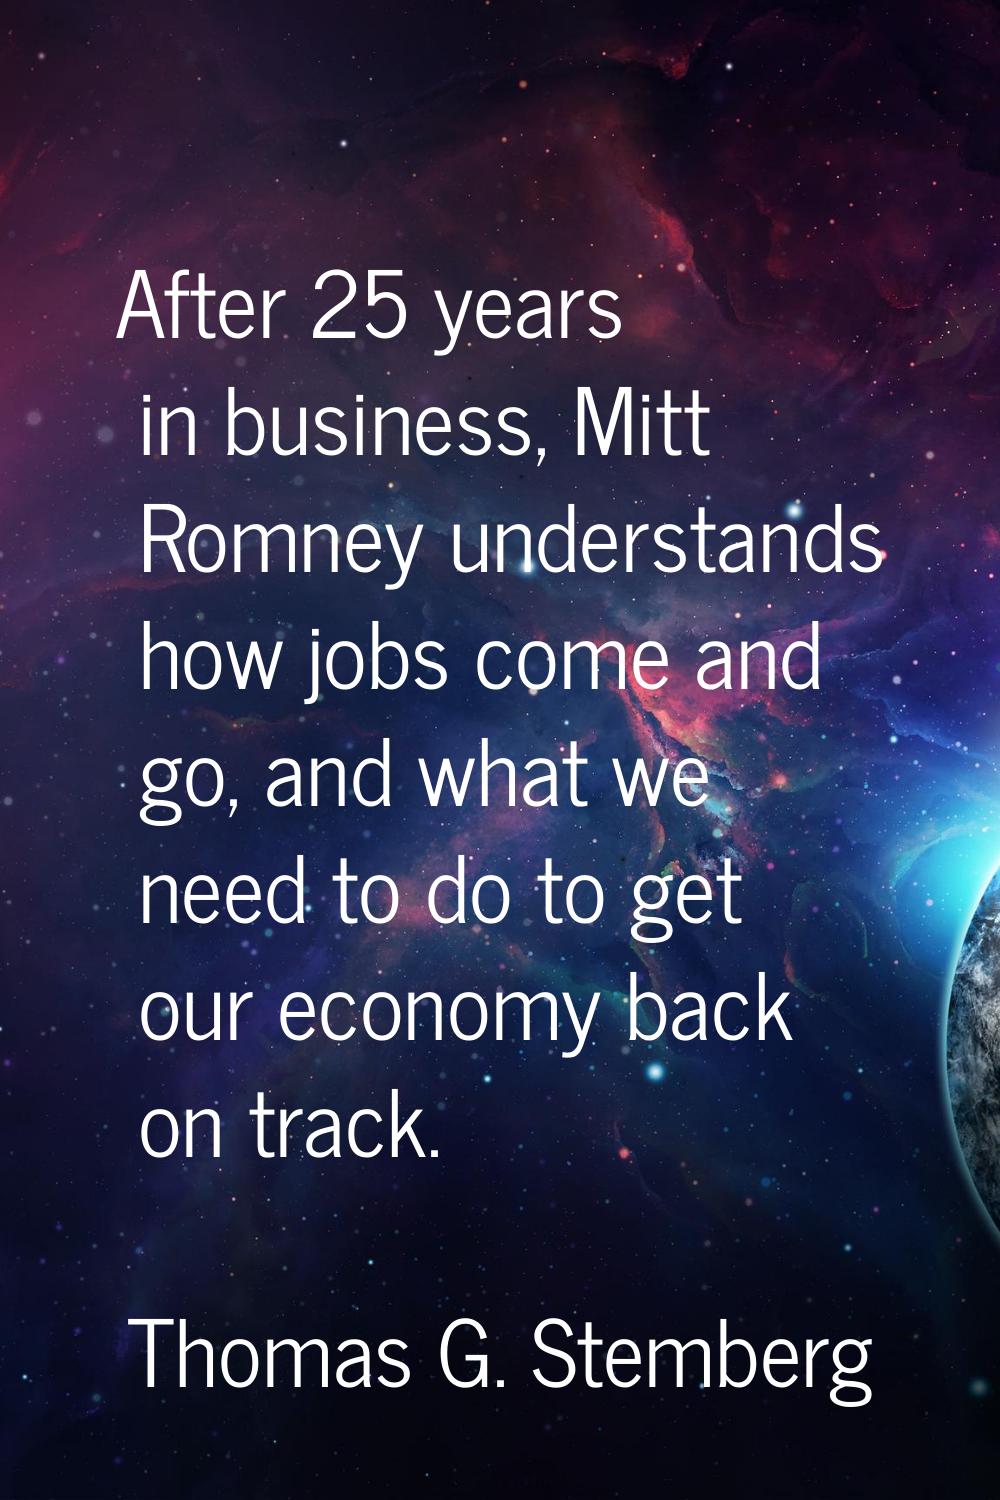 After 25 years in business, Mitt Romney understands how jobs come and go, and what we need to do to